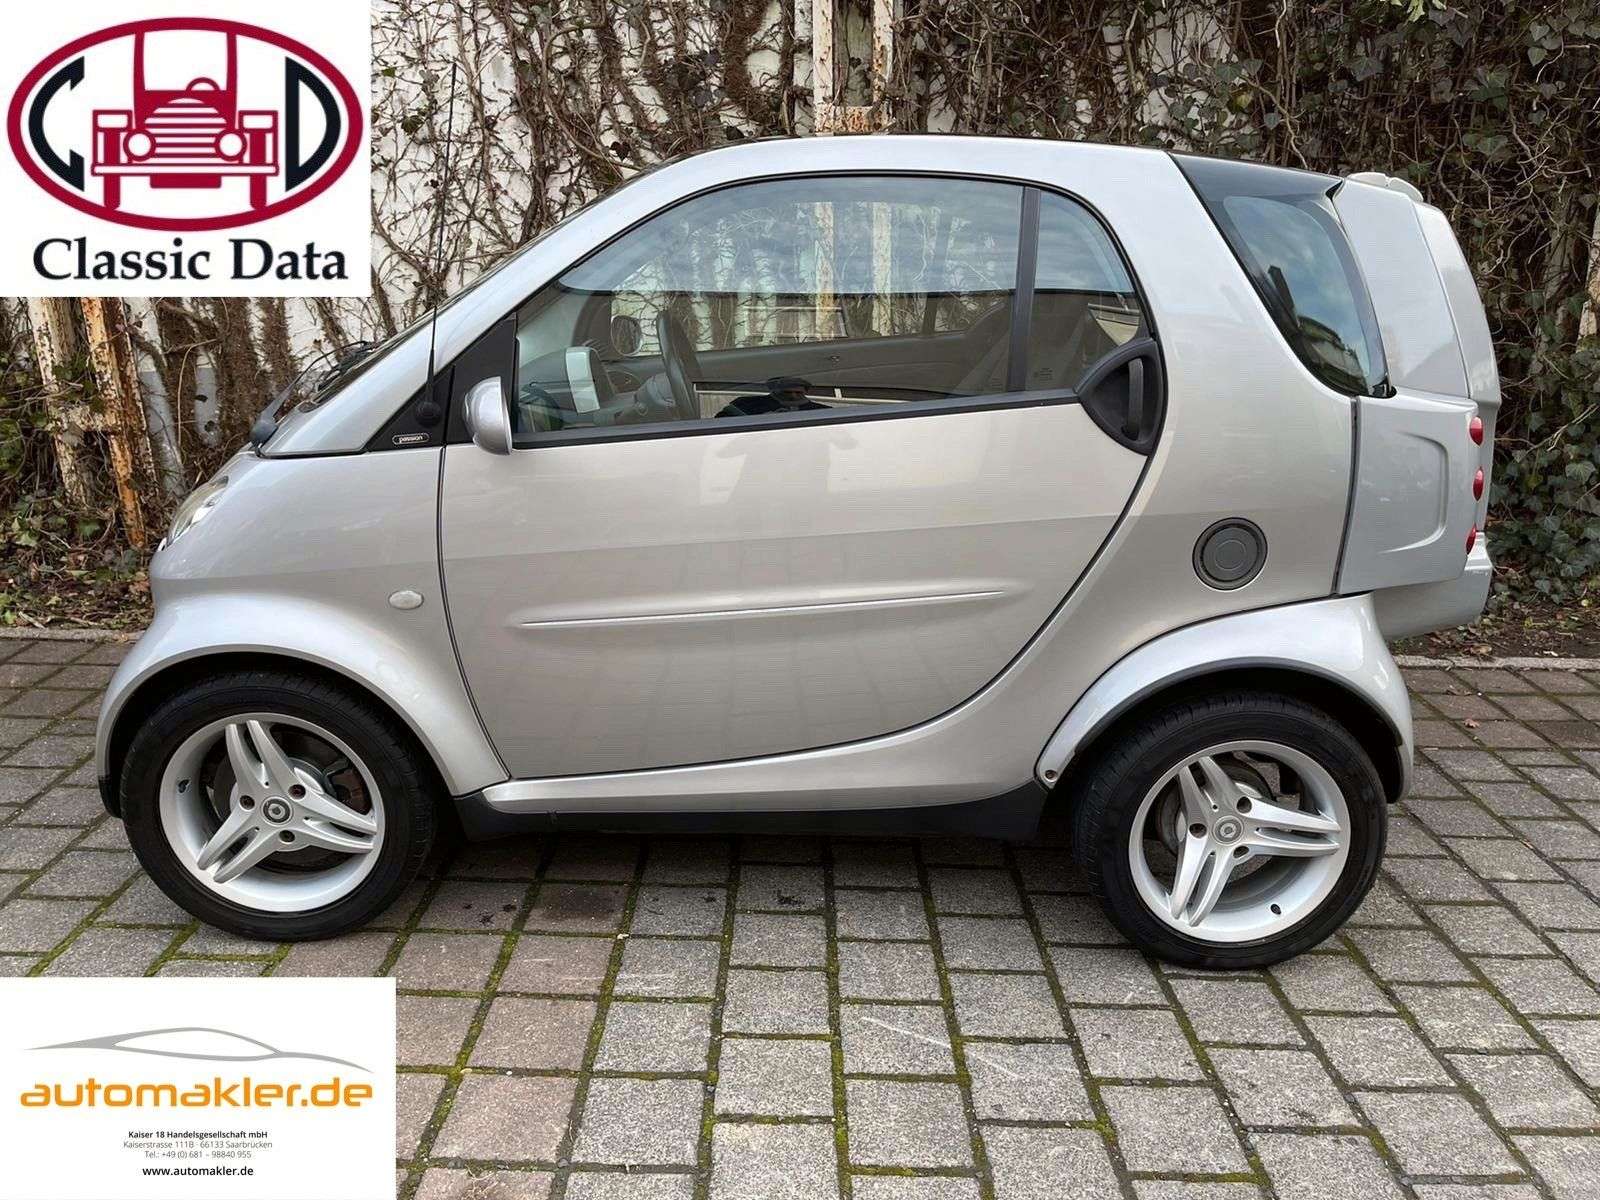 smart forTwo Compact in Silver used in Saarbrücken for € 6,450.-